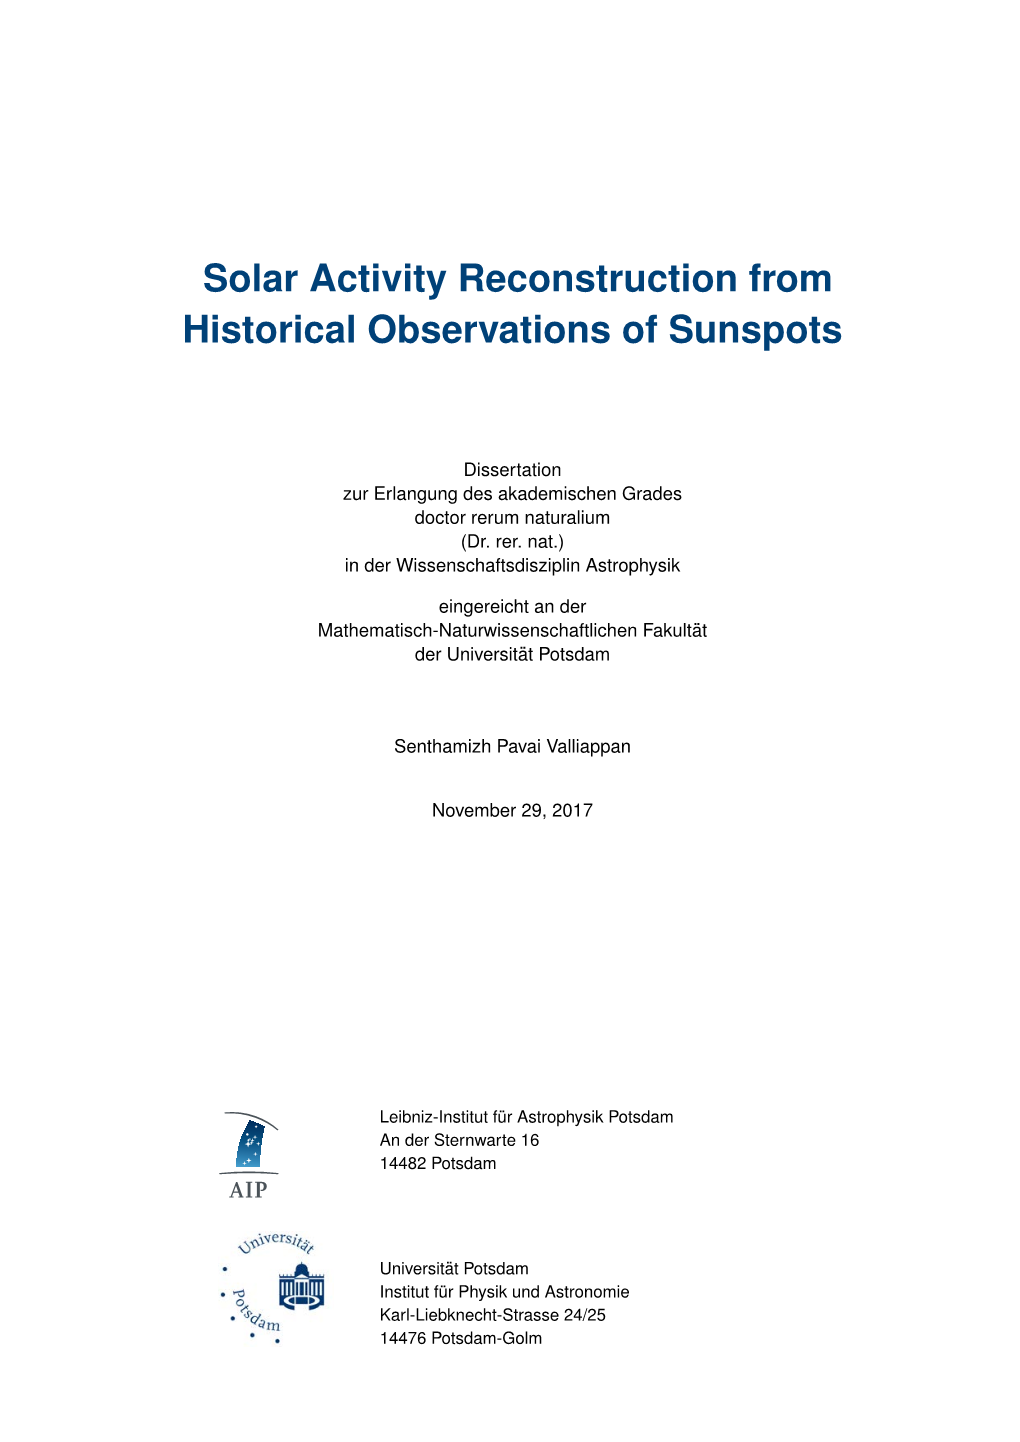 Solar Activity Reconstruction from Historical Observations of Sunspots